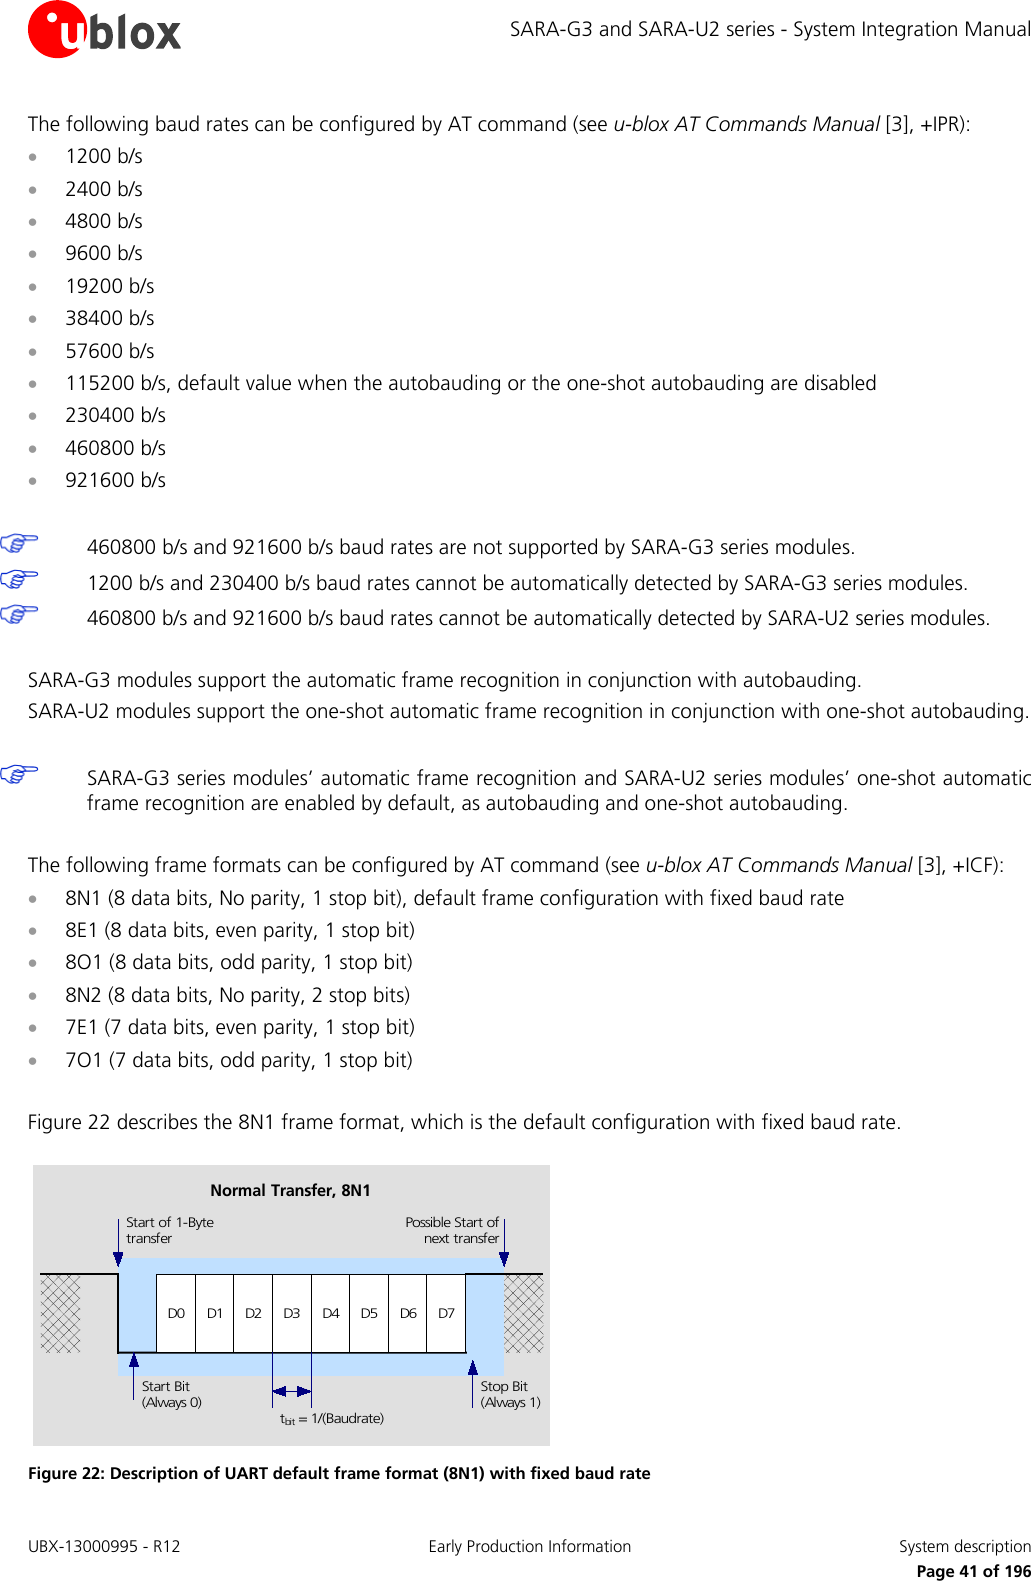 SARA-G3 and SARA-U2 series - System Integration Manual The following baud rates can be configured by AT command (see u-blox AT Commands Manual [3], +IPR): • 1200 b/s  • 2400 b/s • 4800 b/s • 9600 b/s • 19200 b/s • 38400 b/s • 57600 b/s • 115200 b/s, default value when the autobauding or the one-shot autobauding are disabled • 230400 b/s • 460800 b/s • 921600 b/s   460800 b/s and 921600 b/s baud rates are not supported by SARA-G3 series modules.  1200 b/s and 230400 b/s baud rates cannot be automatically detected by SARA-G3 series modules.  460800 b/s and 921600 b/s baud rates cannot be automatically detected by SARA-U2 series modules.  SARA-G3 modules support the automatic frame recognition in conjunction with autobauding. SARA-U2 modules support the one-shot automatic frame recognition in conjunction with one-shot autobauding.   SARA-G3 series modules’ automatic frame recognition and SARA-U2 series modules’ one-shot automatic frame recognition are enabled by default, as autobauding and one-shot autobauding.  The following frame formats can be configured by AT command (see u-blox AT Commands Manual [3], +ICF):  • 8N1 (8 data bits, No parity, 1 stop bit), default frame configuration with fixed baud rate • 8E1 (8 data bits, even parity, 1 stop bit) • 8O1 (8 data bits, odd parity, 1 stop bit) • 8N2 (8 data bits, No parity, 2 stop bits) • 7E1 (7 data bits, even parity, 1 stop bit) • 7O1 (7 data bits, odd parity, 1 stop bit)  Figure 22 describes the 8N1 frame format, which is the default configuration with fixed baud rate. D0 D1 D2 D3 D4 D5 D6 D7Start of 1-BytetransferStart Bit(Always 0)Possible Start ofnext transferStop Bit(Always 1)tbit = 1/(Baudrate)Normal Transfer, 8N1 Figure 22: Description of UART default frame format (8N1) with fixed baud rate UBX-13000995 - R12 Early Production Information System description     Page 41 of 196 